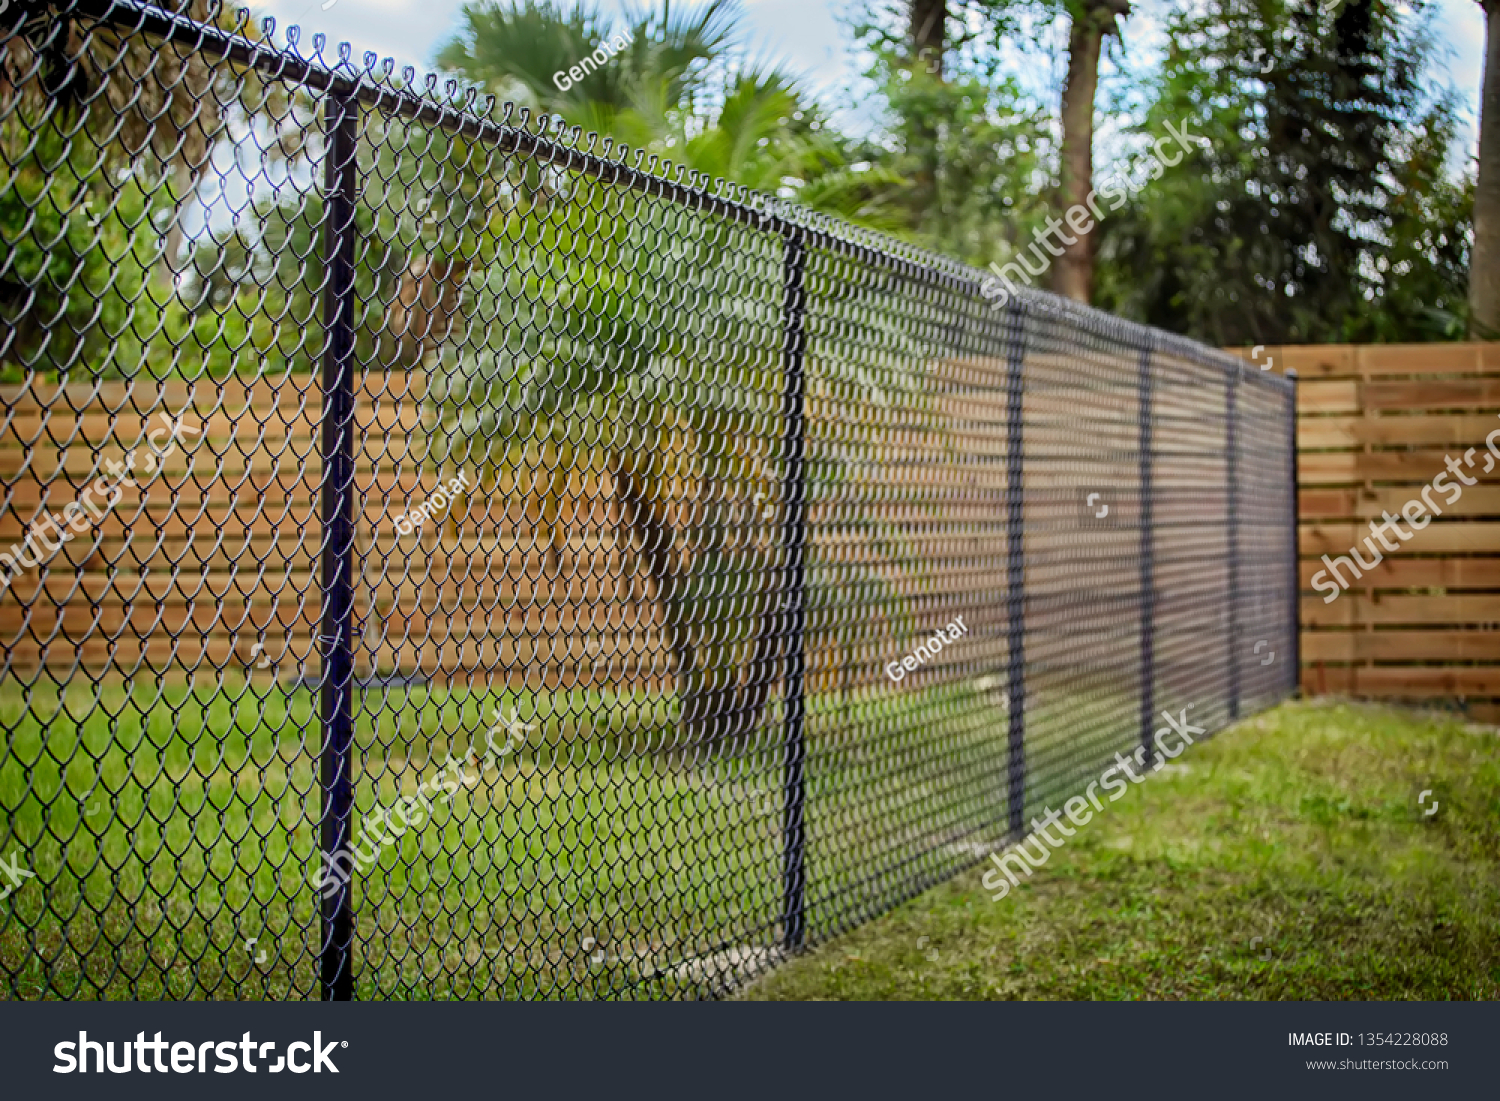 Black Chain Link Fence #1354228088